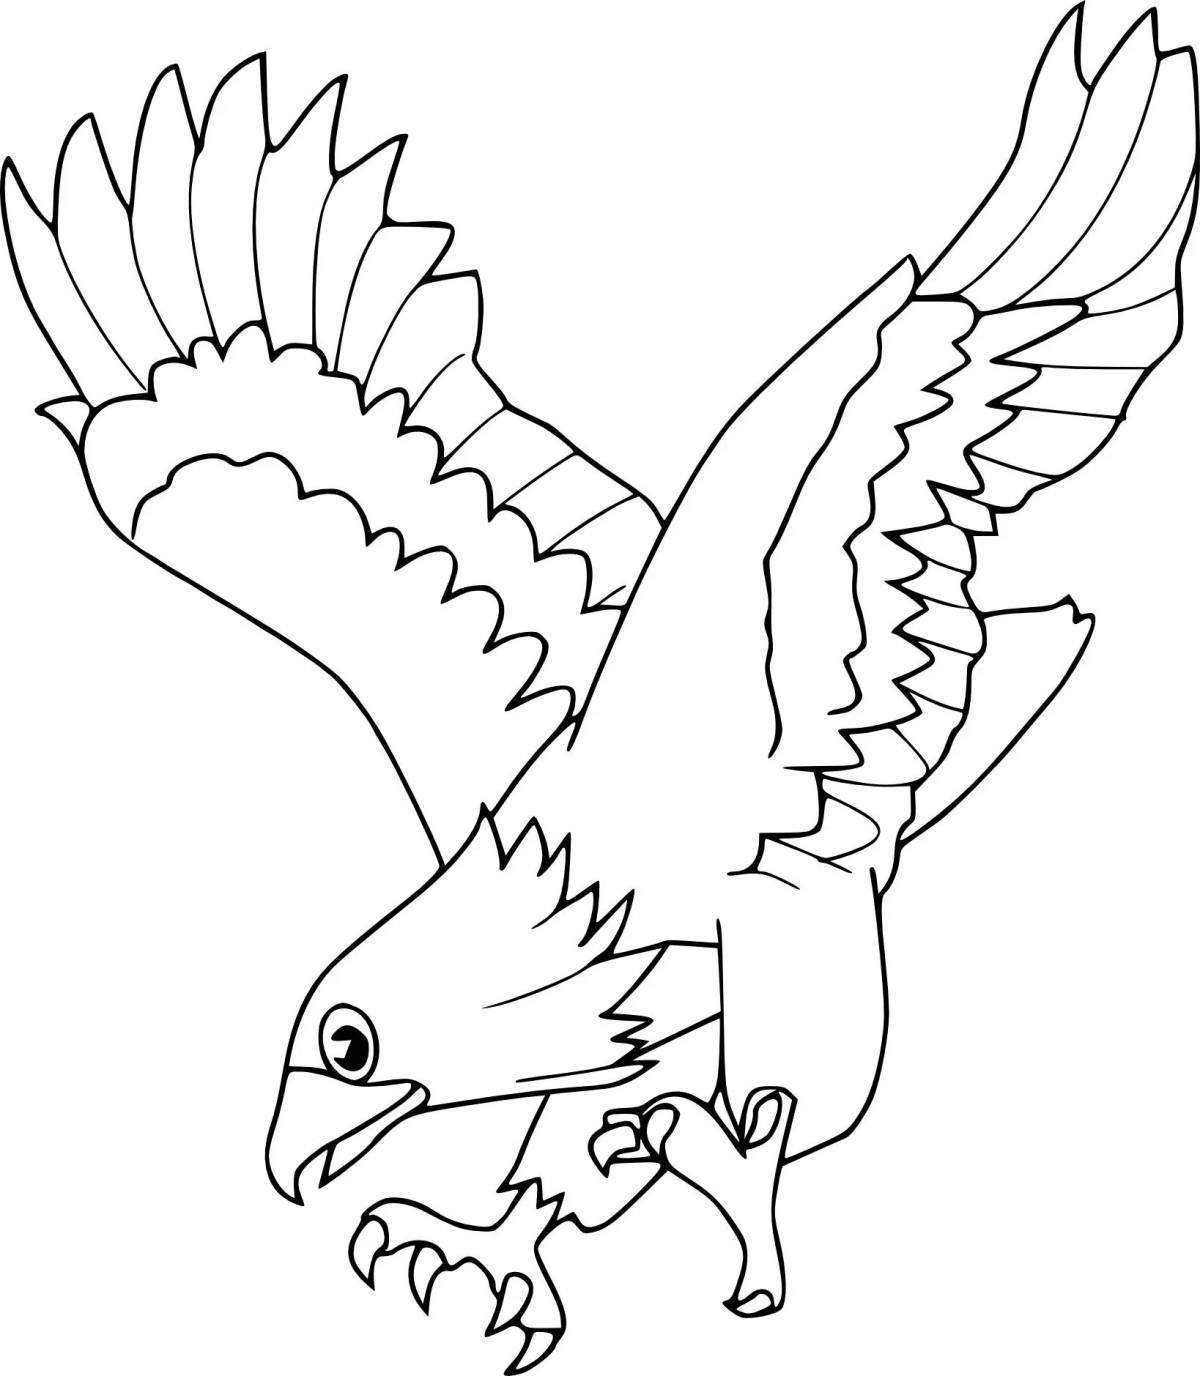 Glorious eagle coloring page